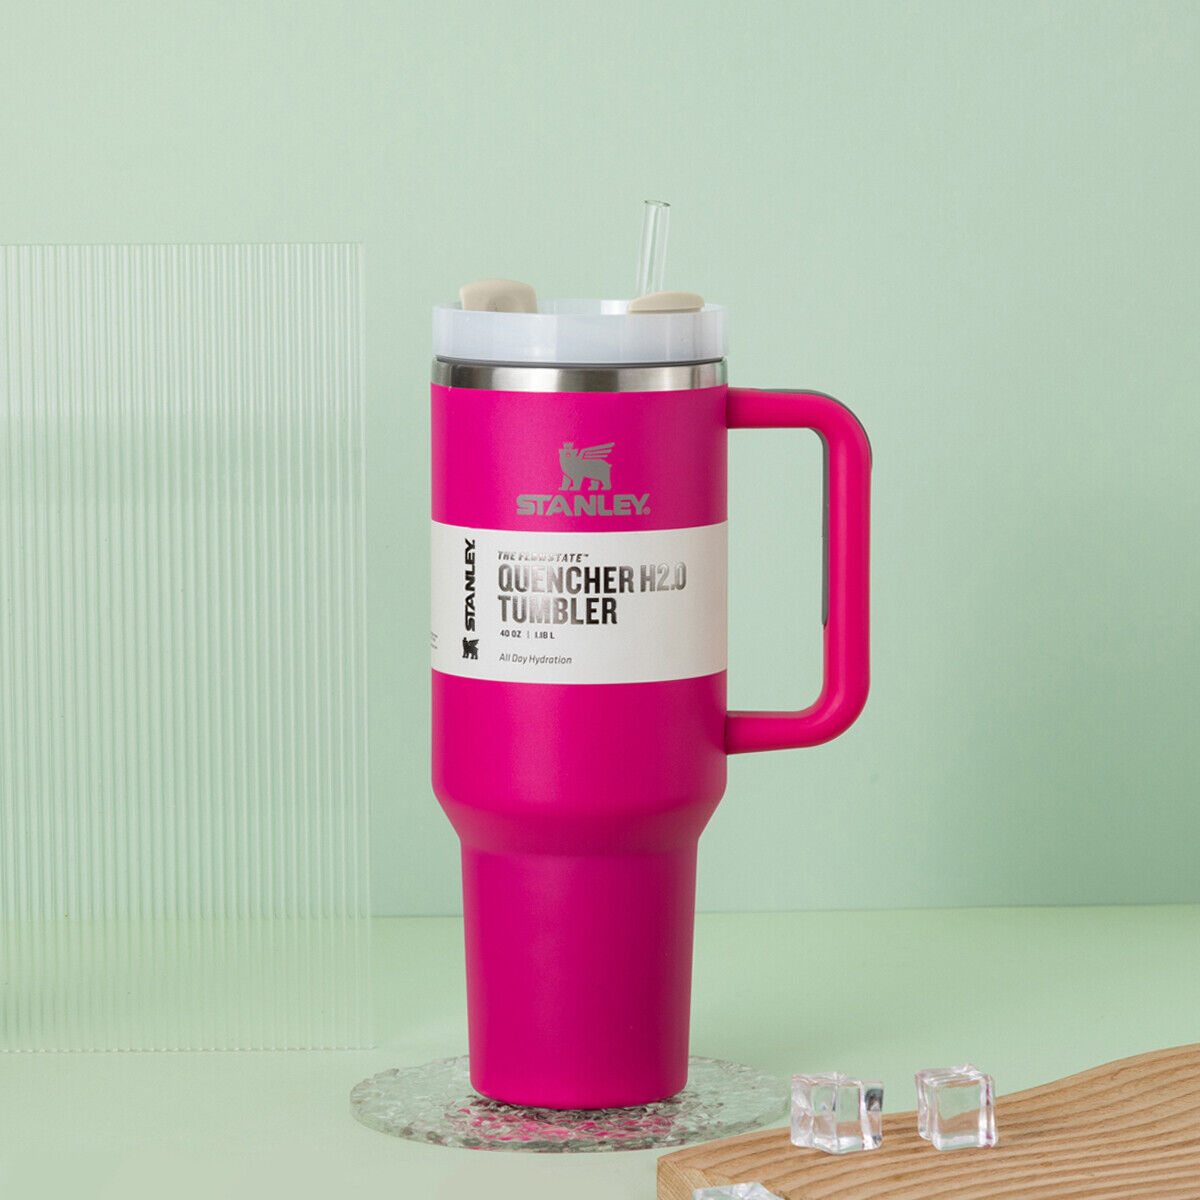 Vacuum Insulated Tumbler with Lid and Straw in pink color